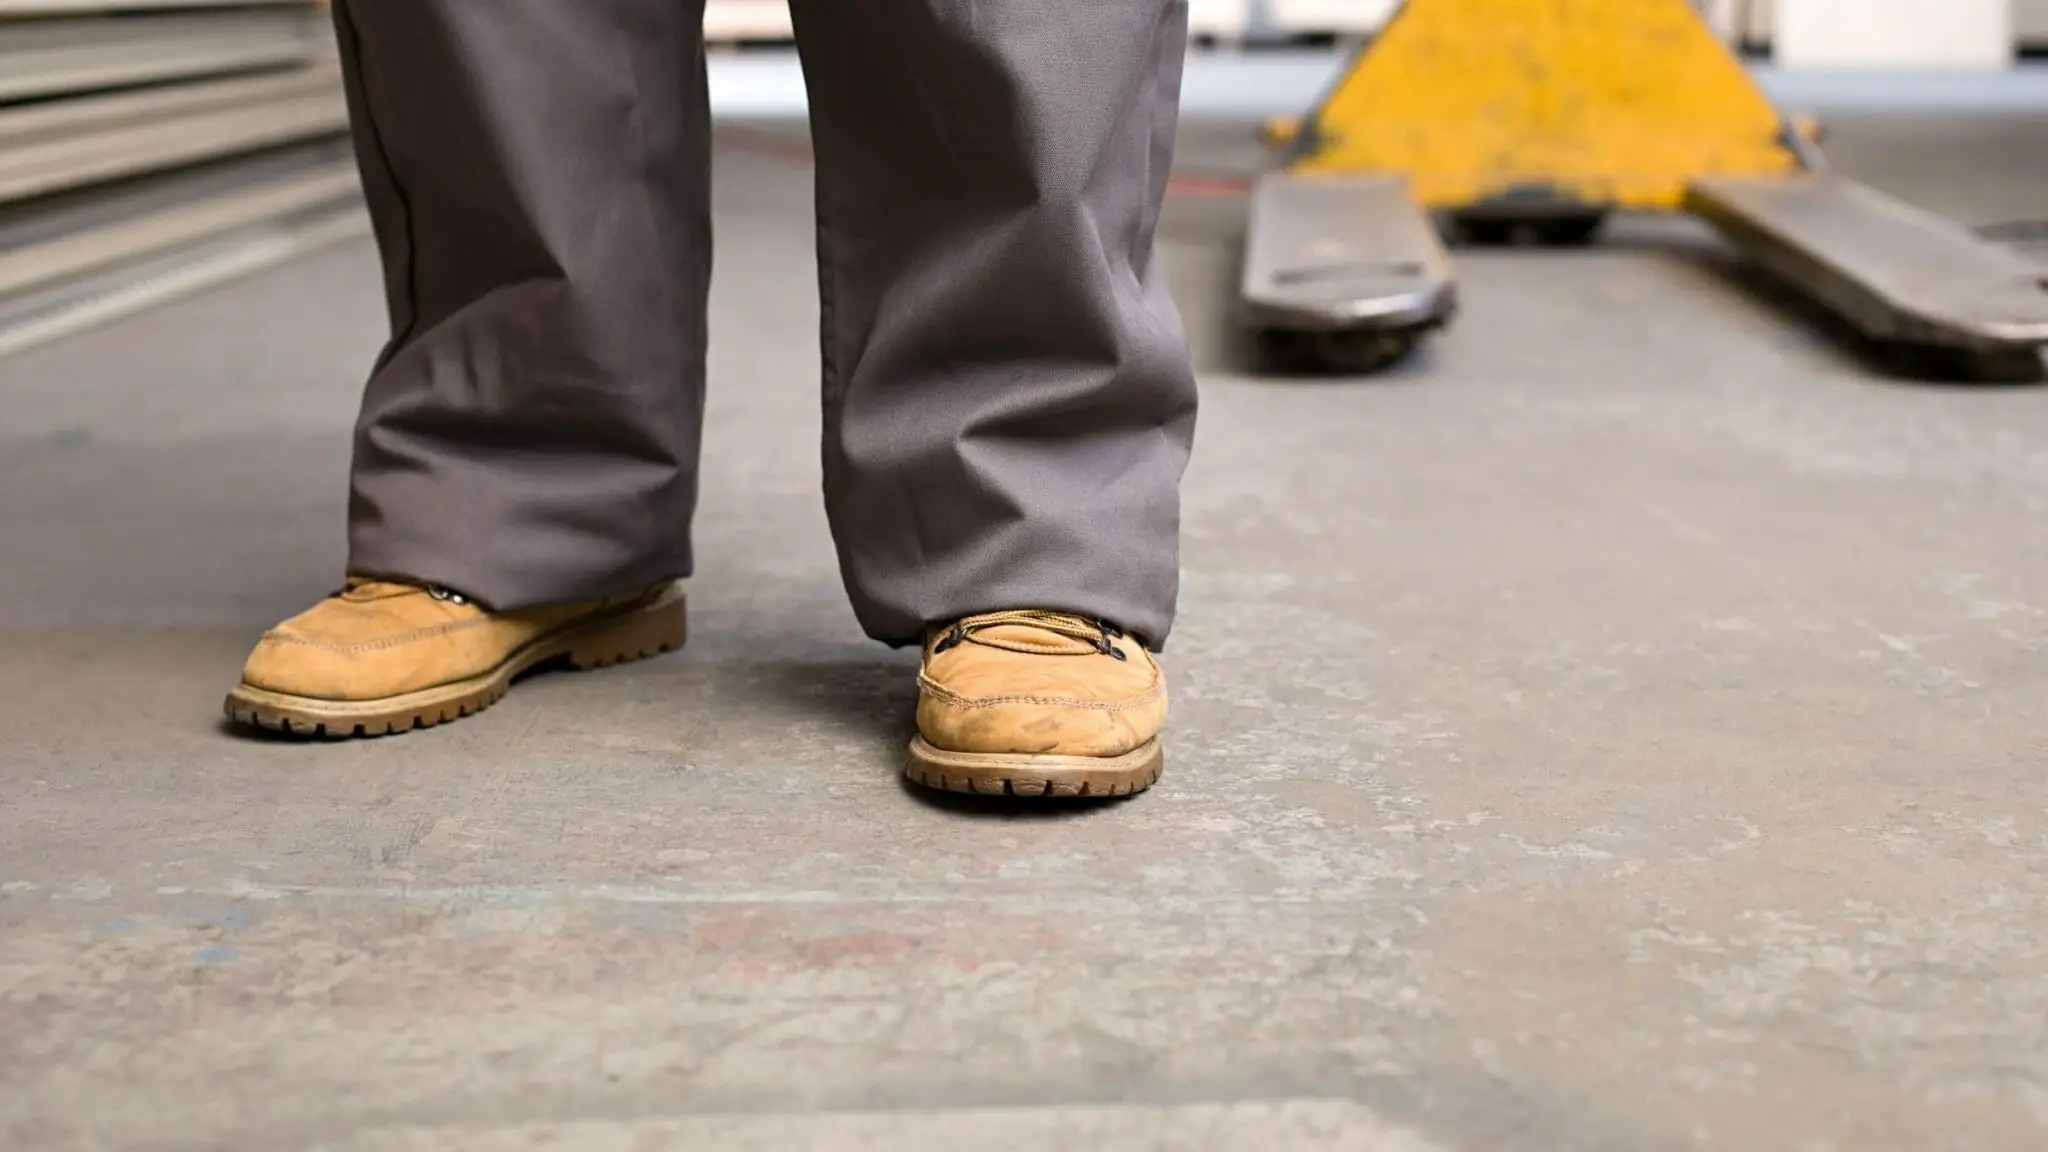 Top 10 Ultimate Shoes for Working and Walking on Concrete Floors